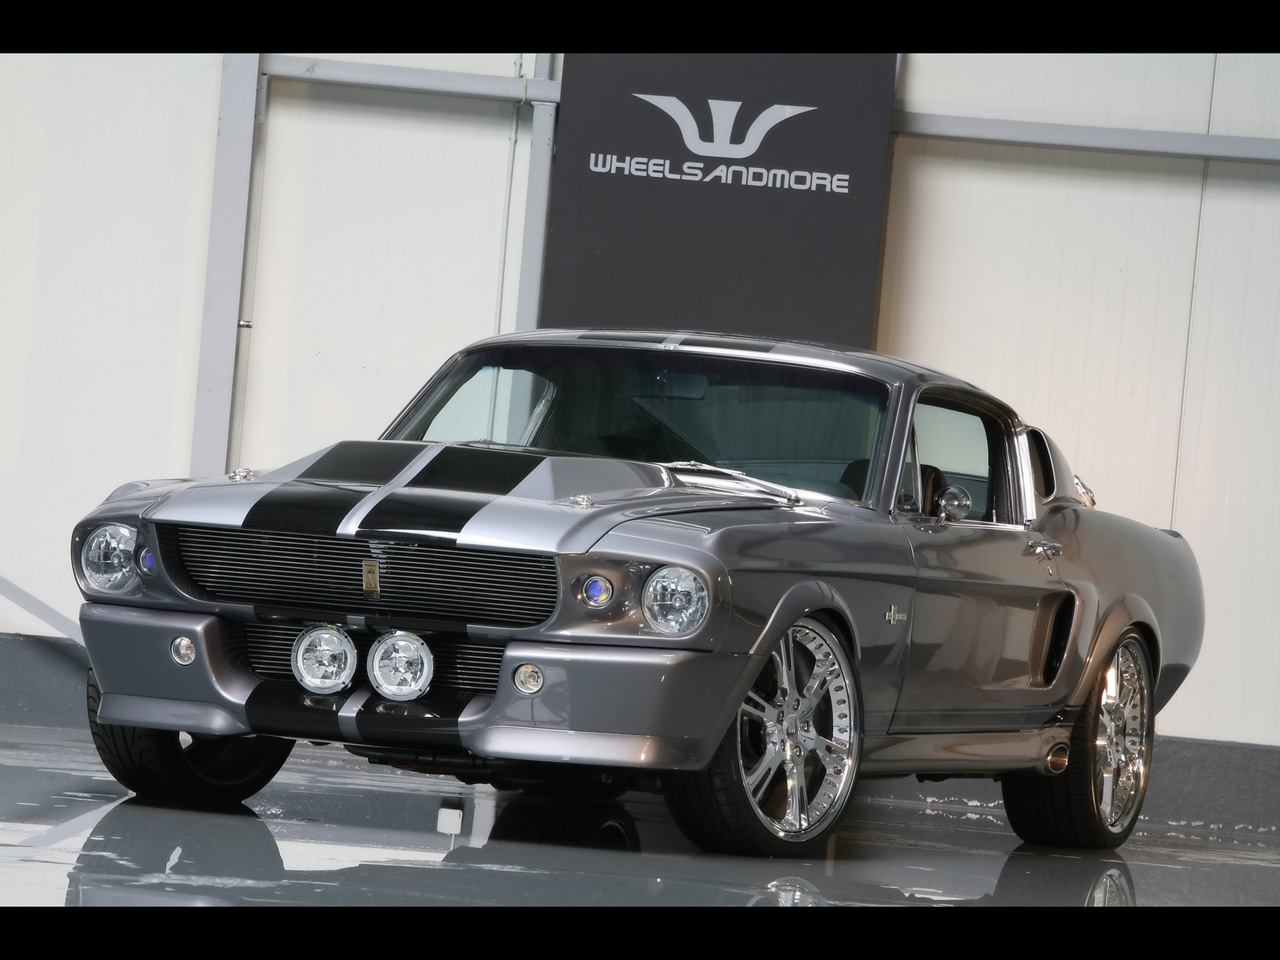 2009 Wheelsandmore Mustang Shelby GT500